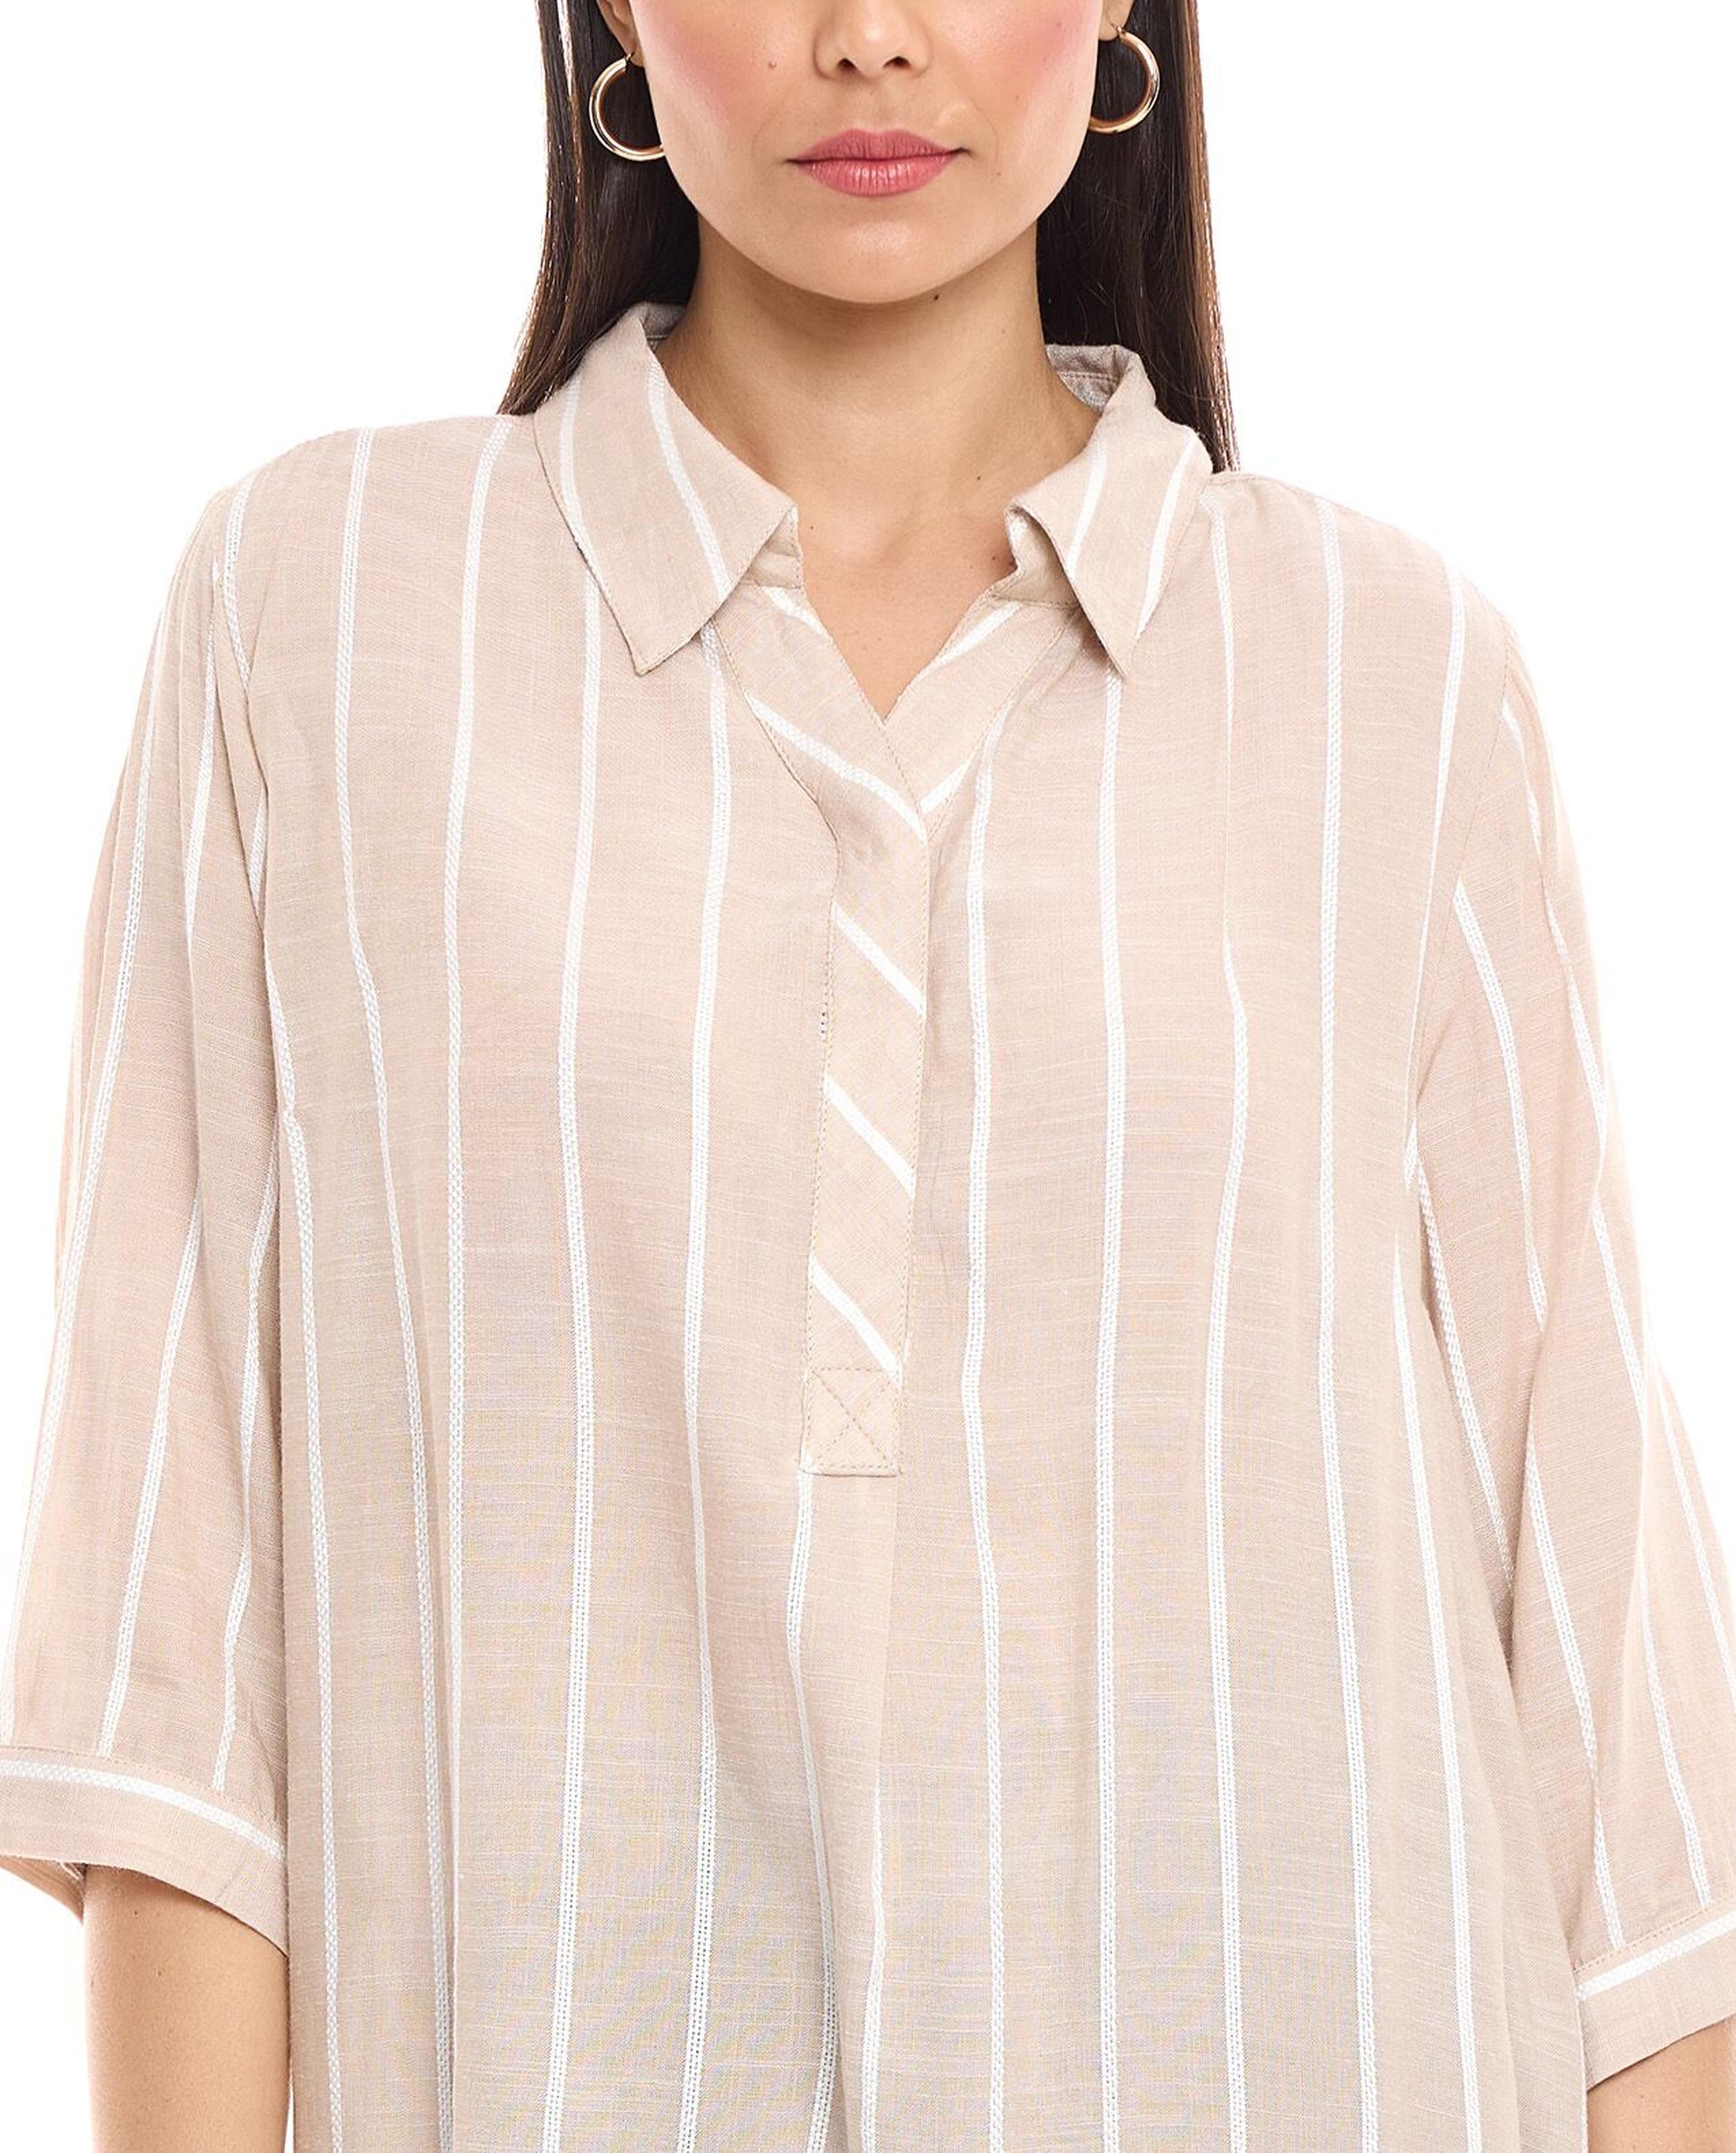 Striped High-Low Shirt with Spread Collar and 3/4 Sleeves